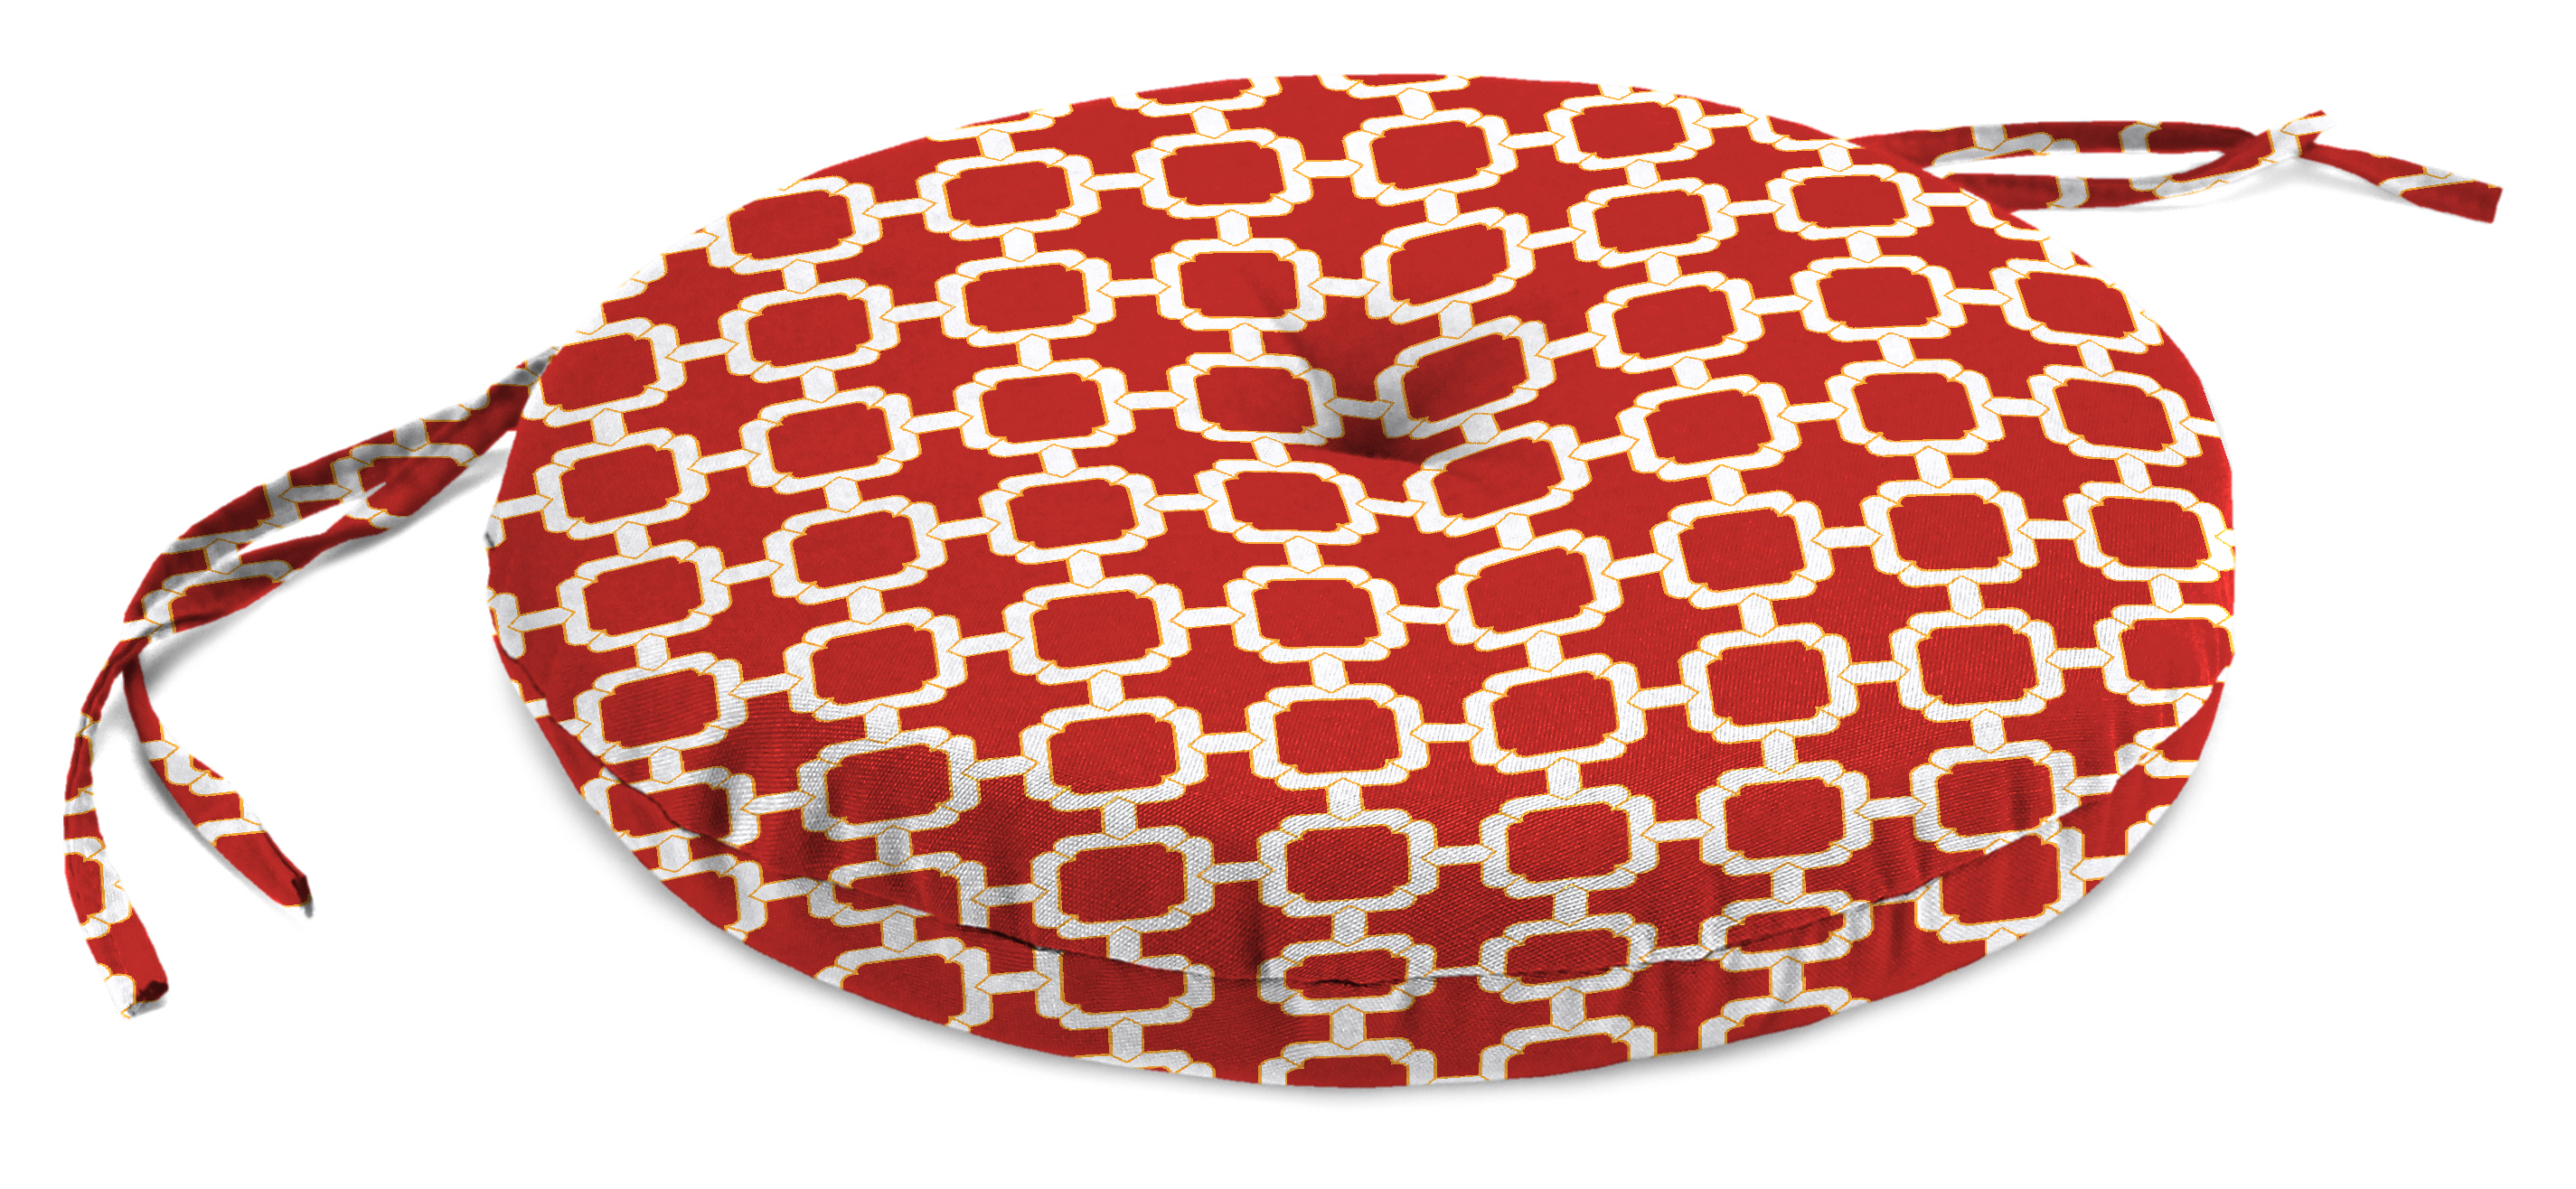 15" Round Bistro Patio Chair Cushion in Hockley Red